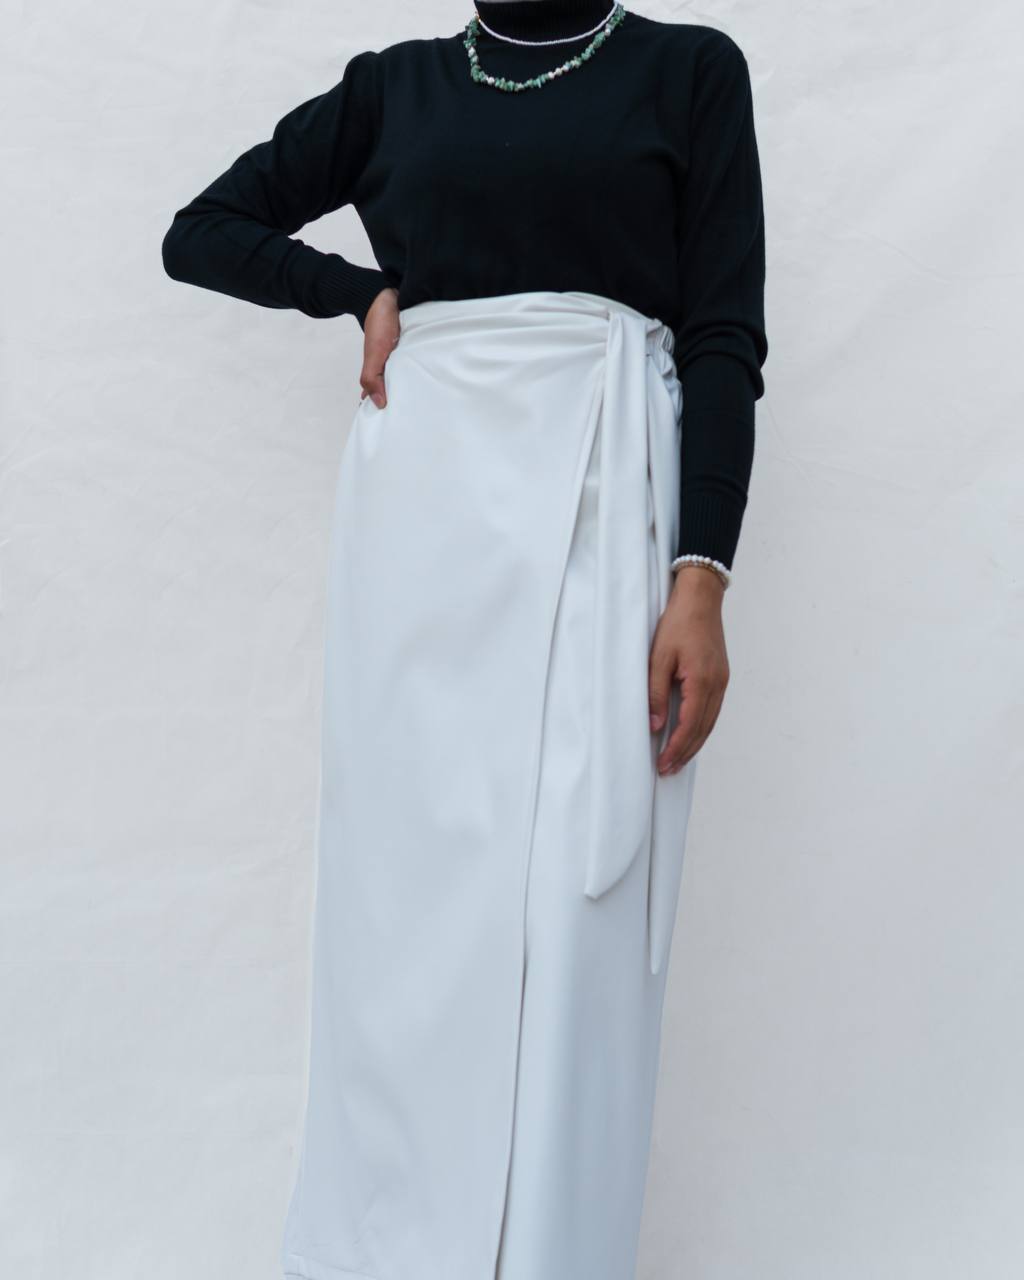 <p><strong><span style="color: #a67329ff">White Leather Skirt</span></strong></p>